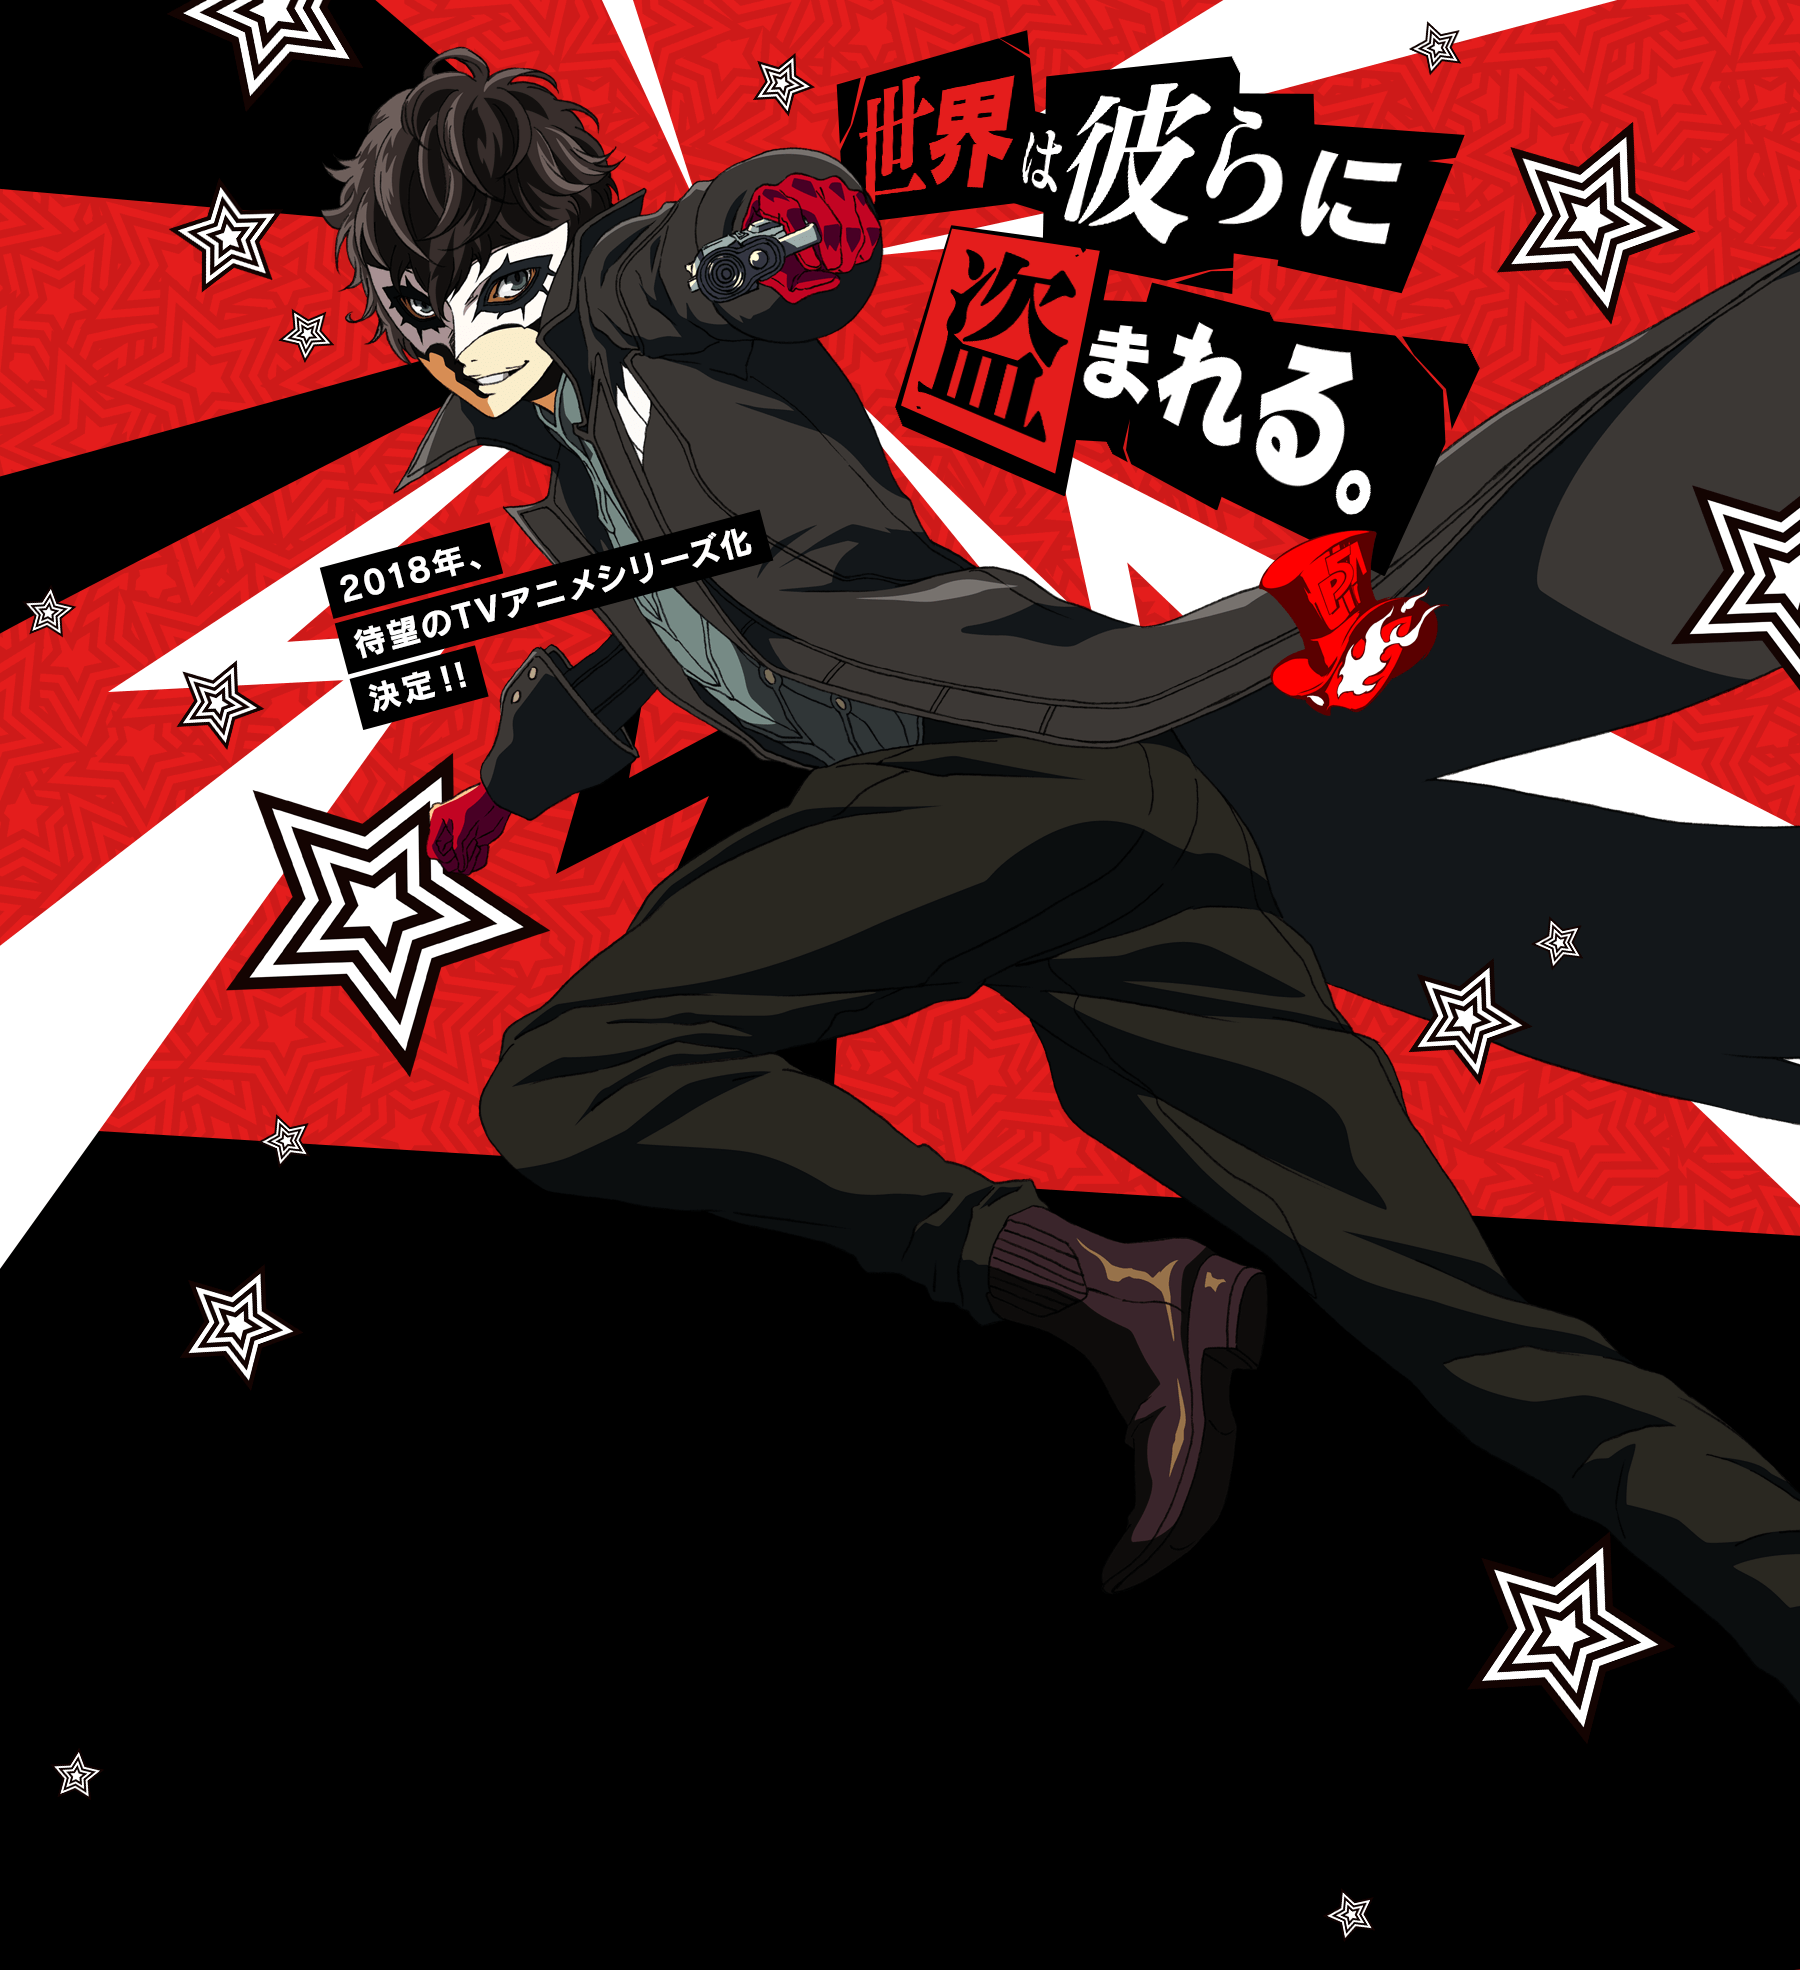 Persona 5 the Animation online